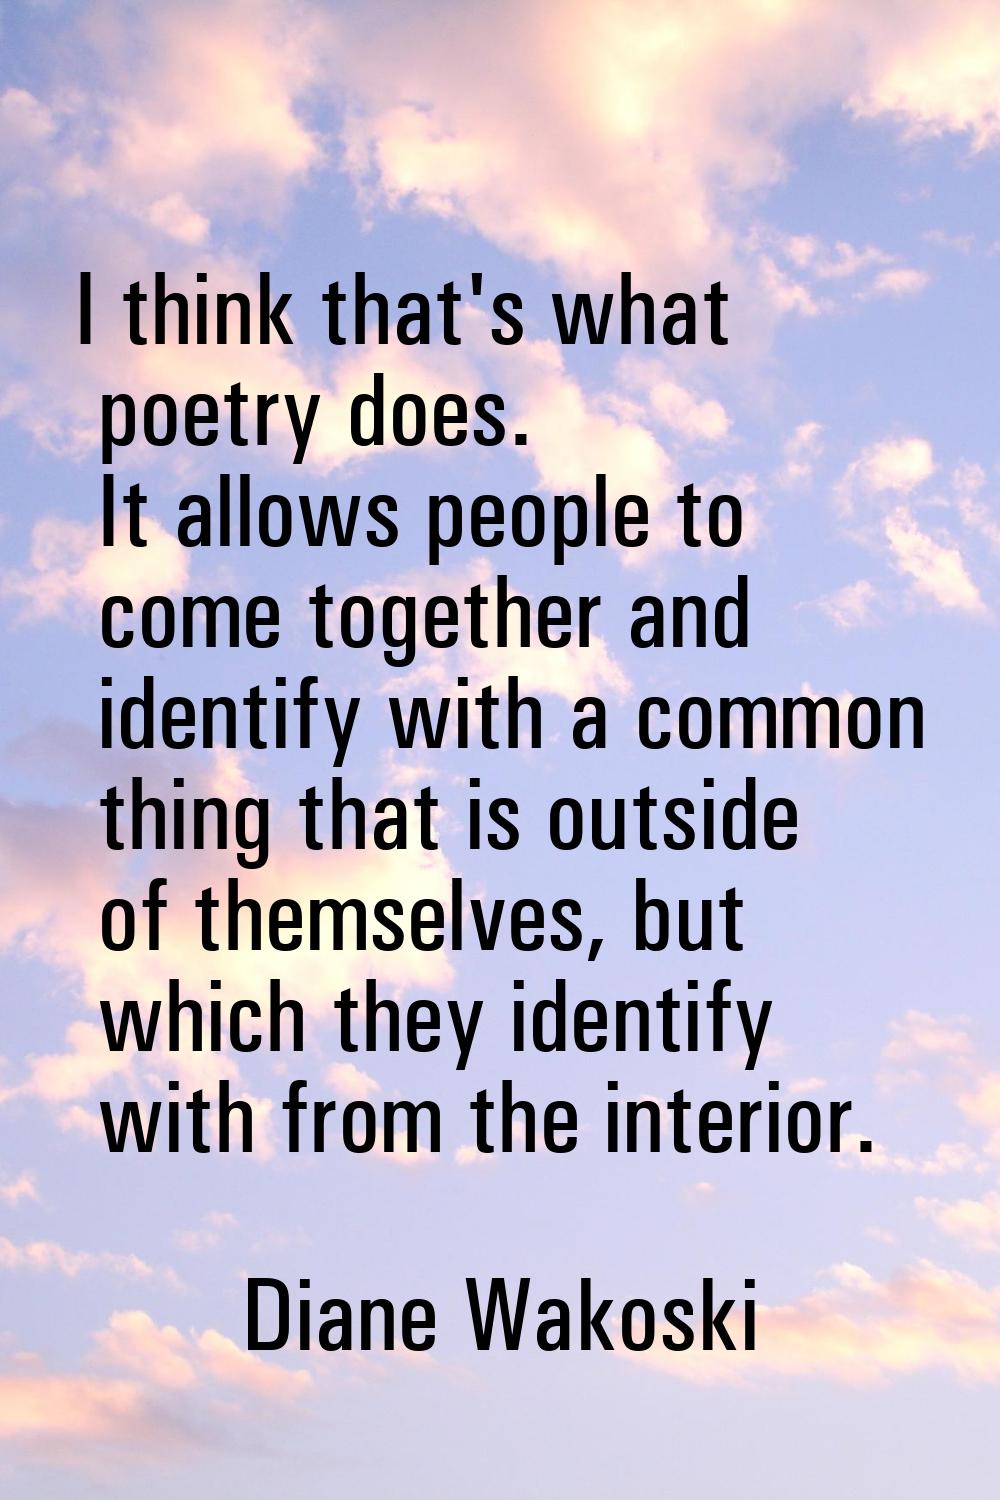 I think that's what poetry does. It allows people to come together and identify with a common thing